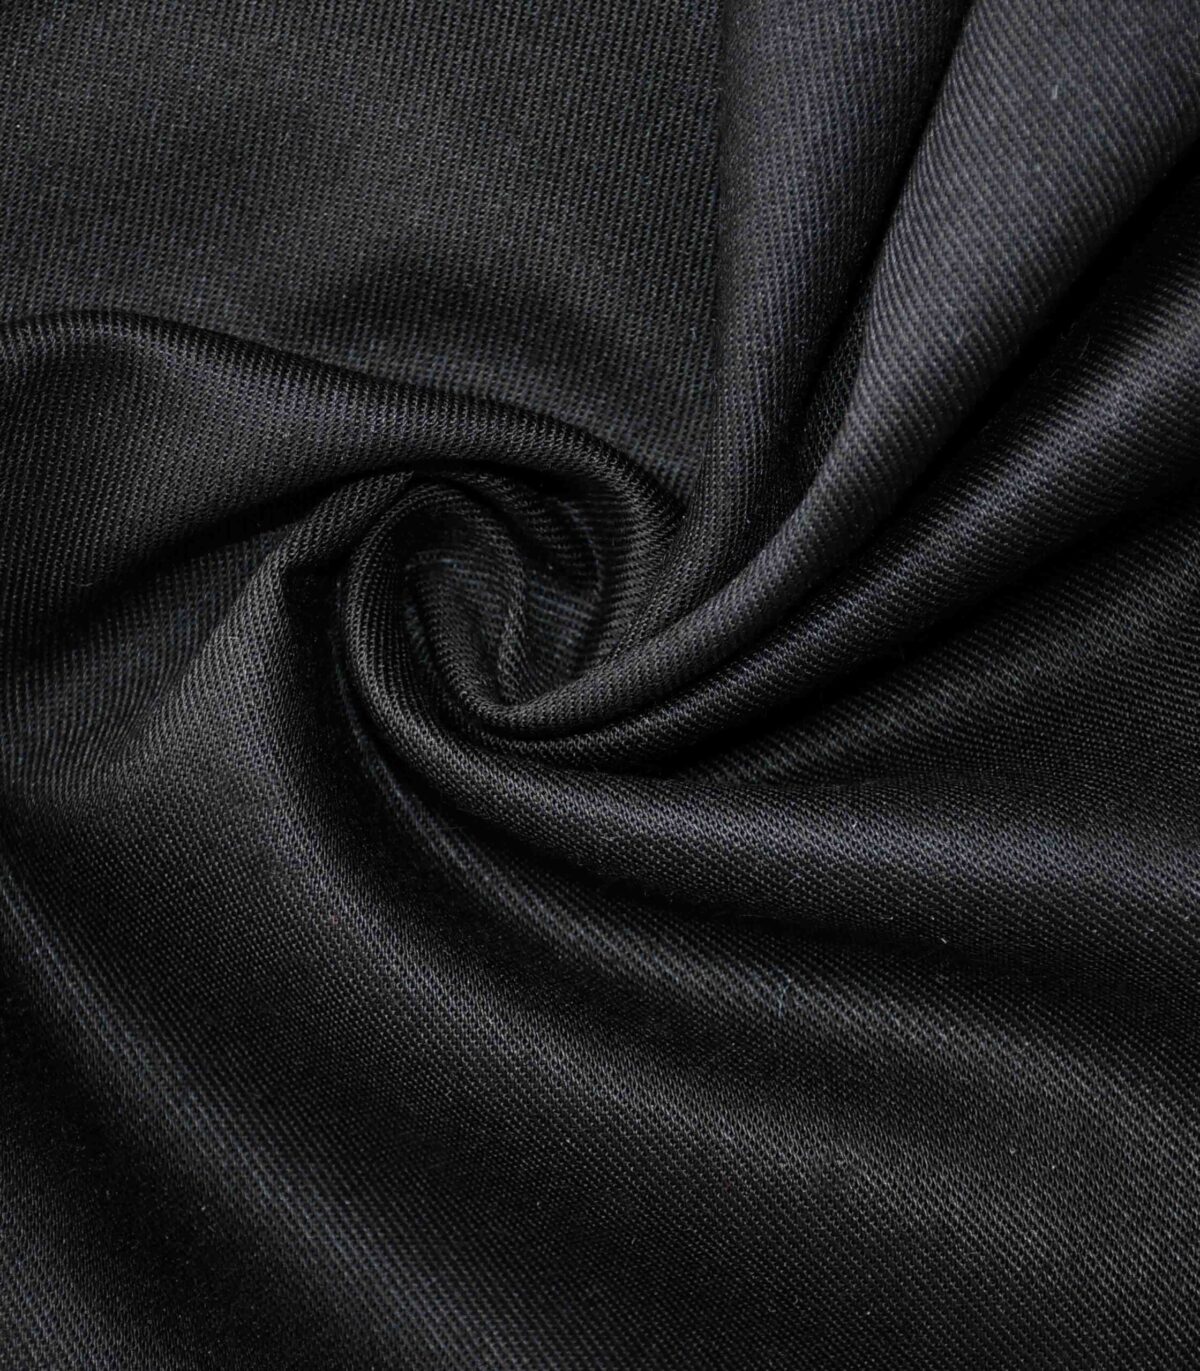 Poly Cotton Twill RFD Woven Fabric